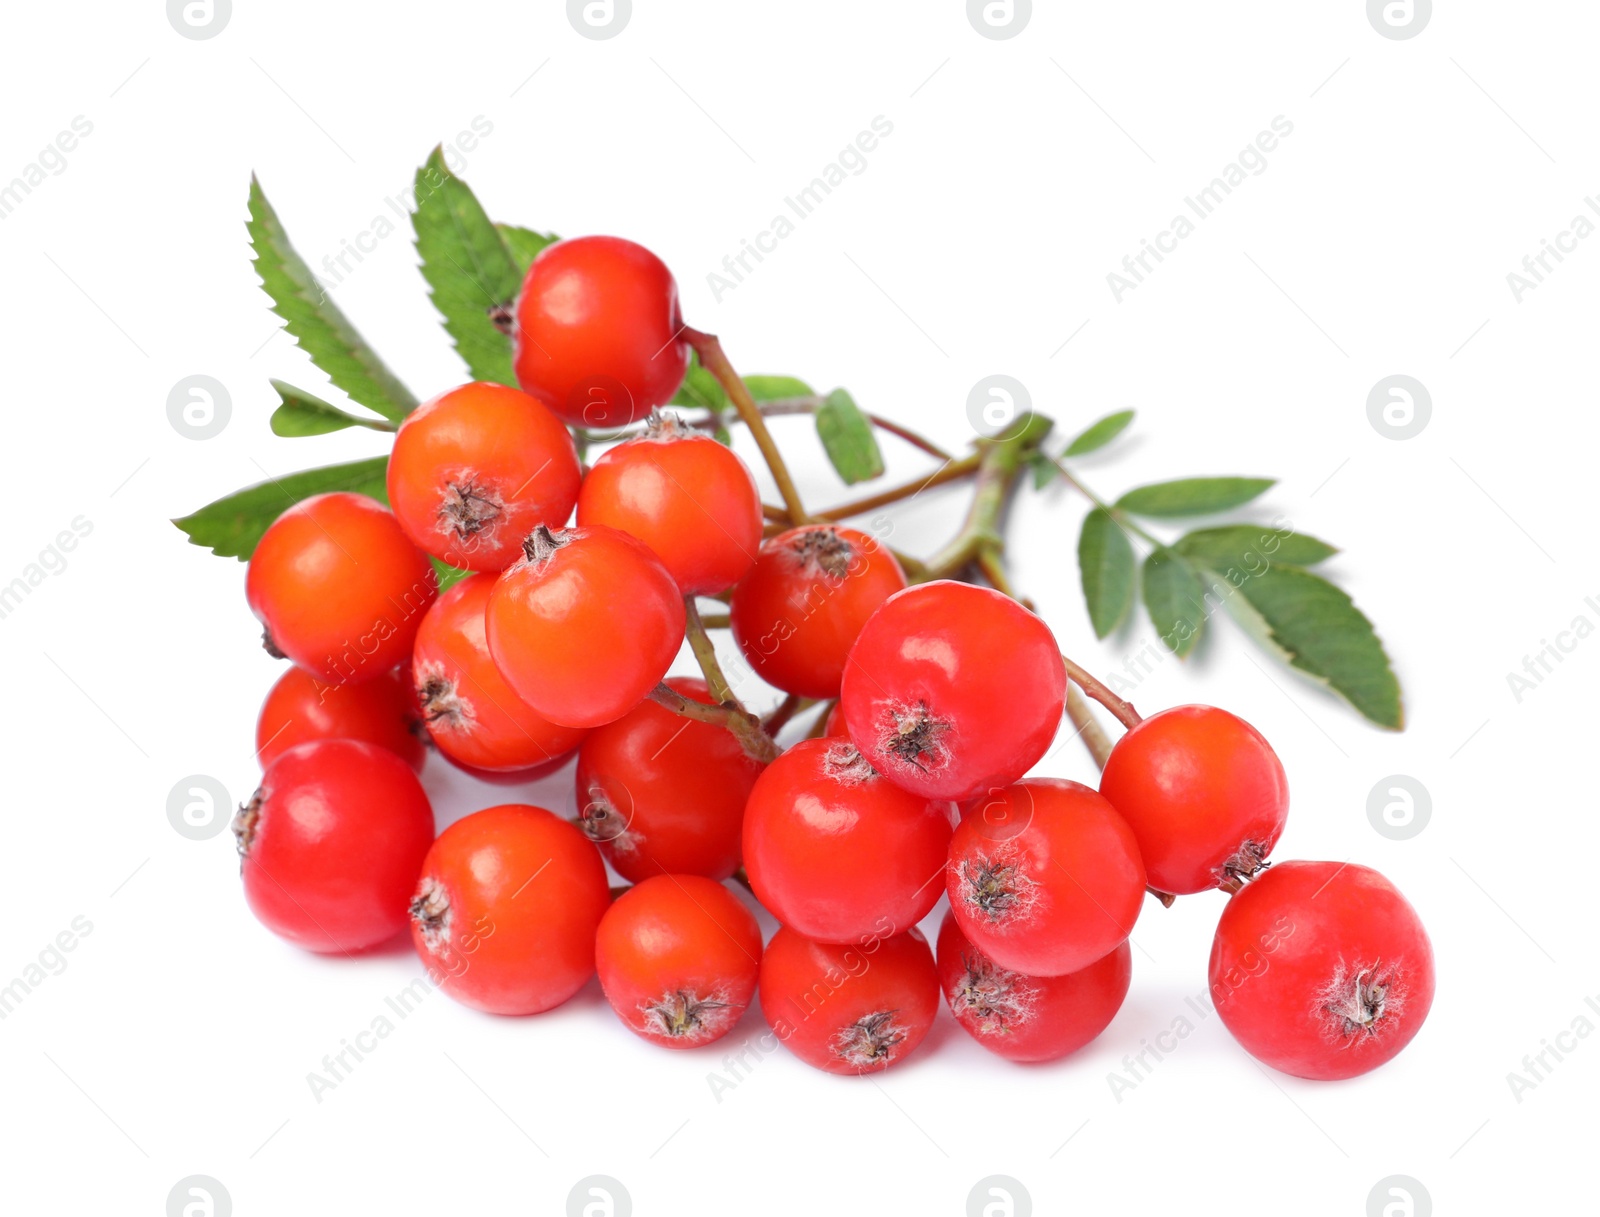 Photo of Bunch of ripe rowan berries with green leaves on white background